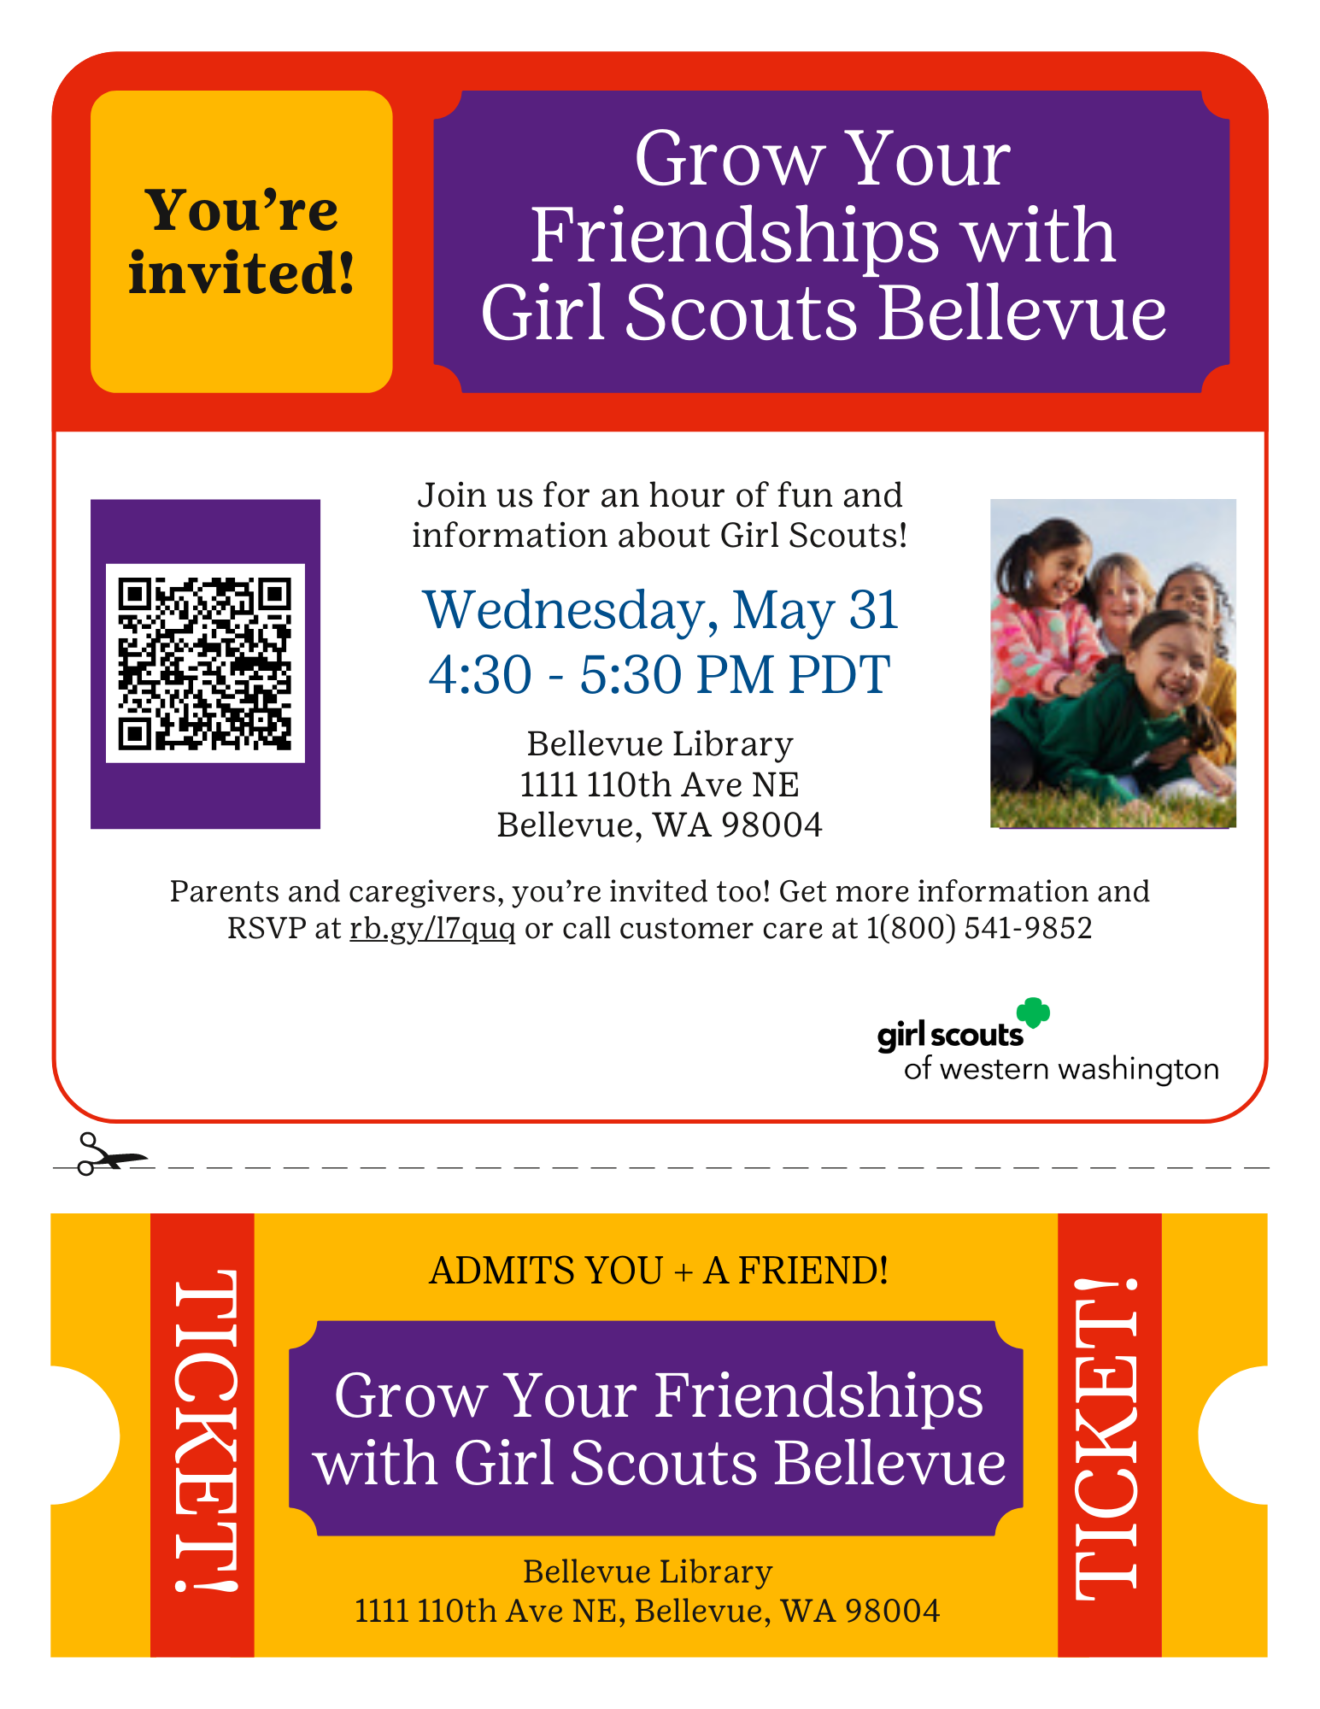 Girl Scout Recruiting Event this Wednesday at Bellevue Library